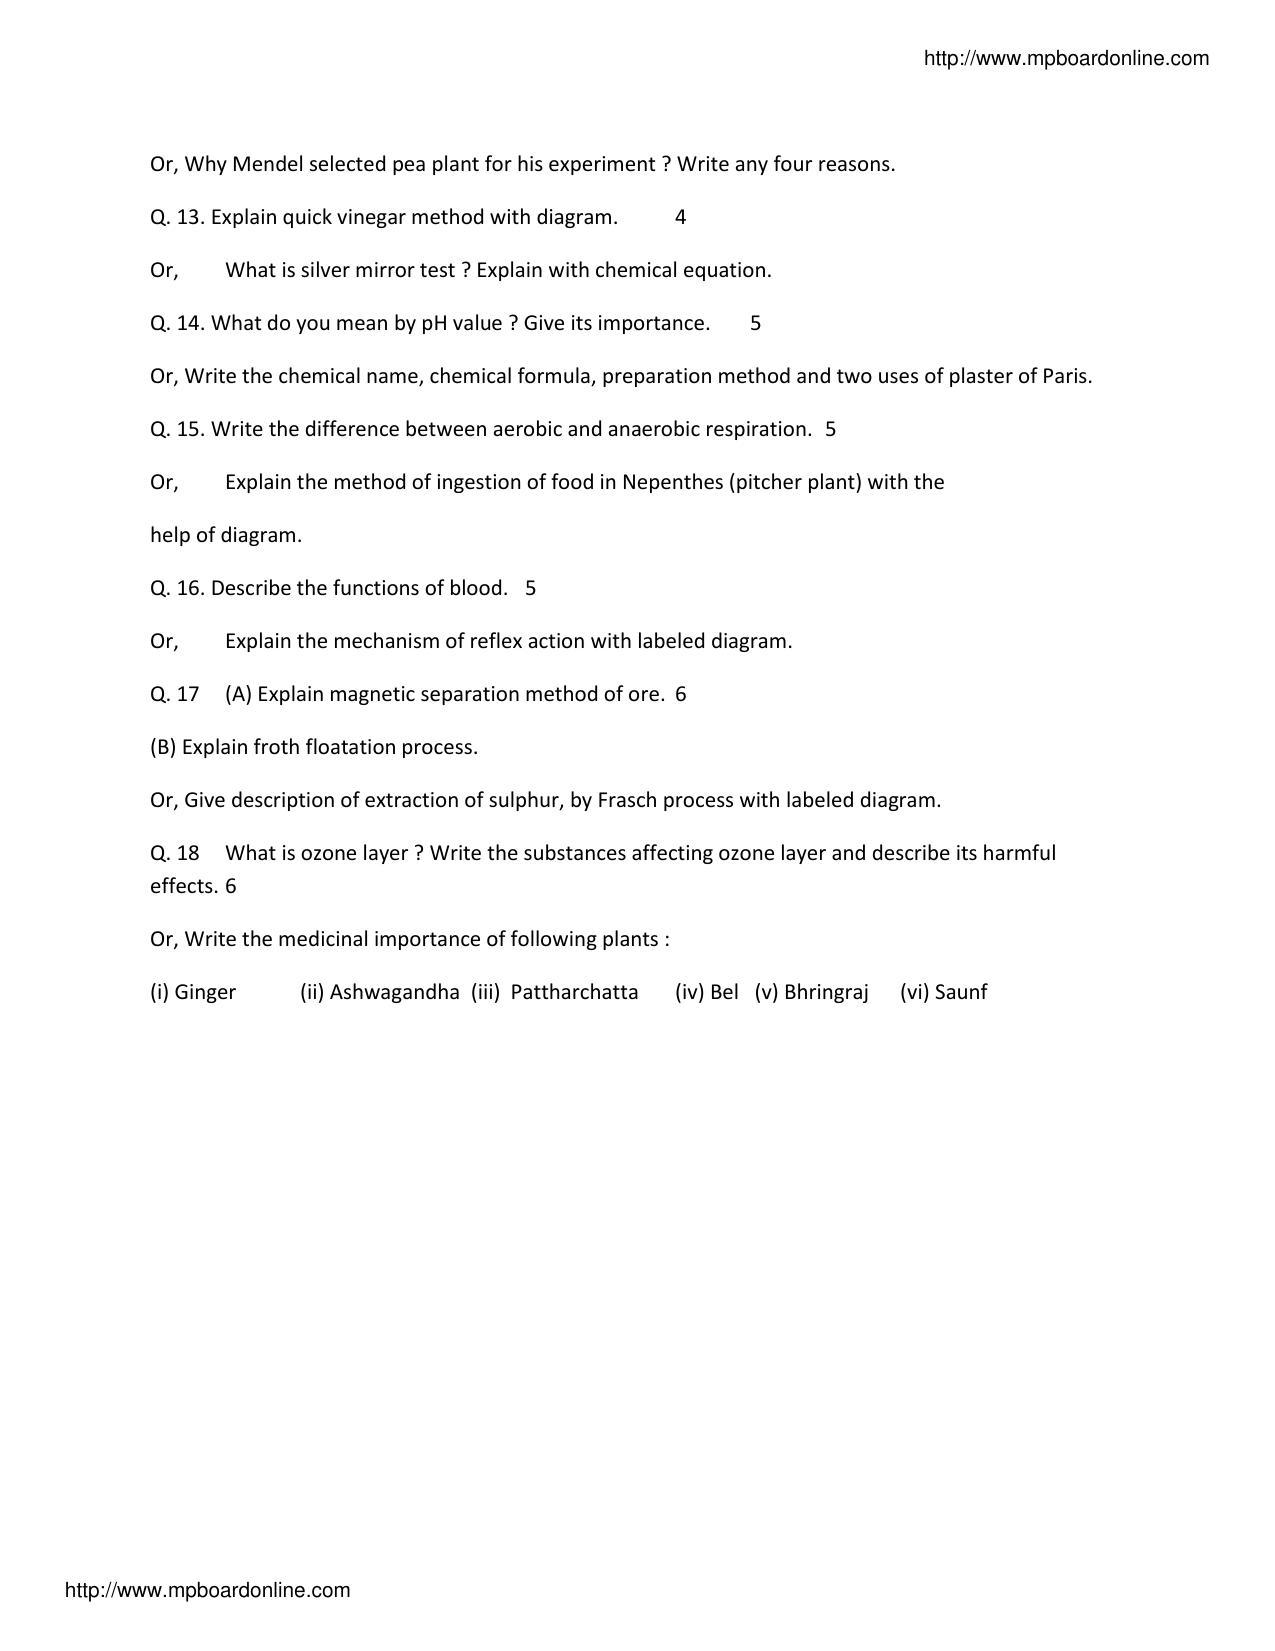 MP Board Class 10 Science 2016 Question Paper - Page 3